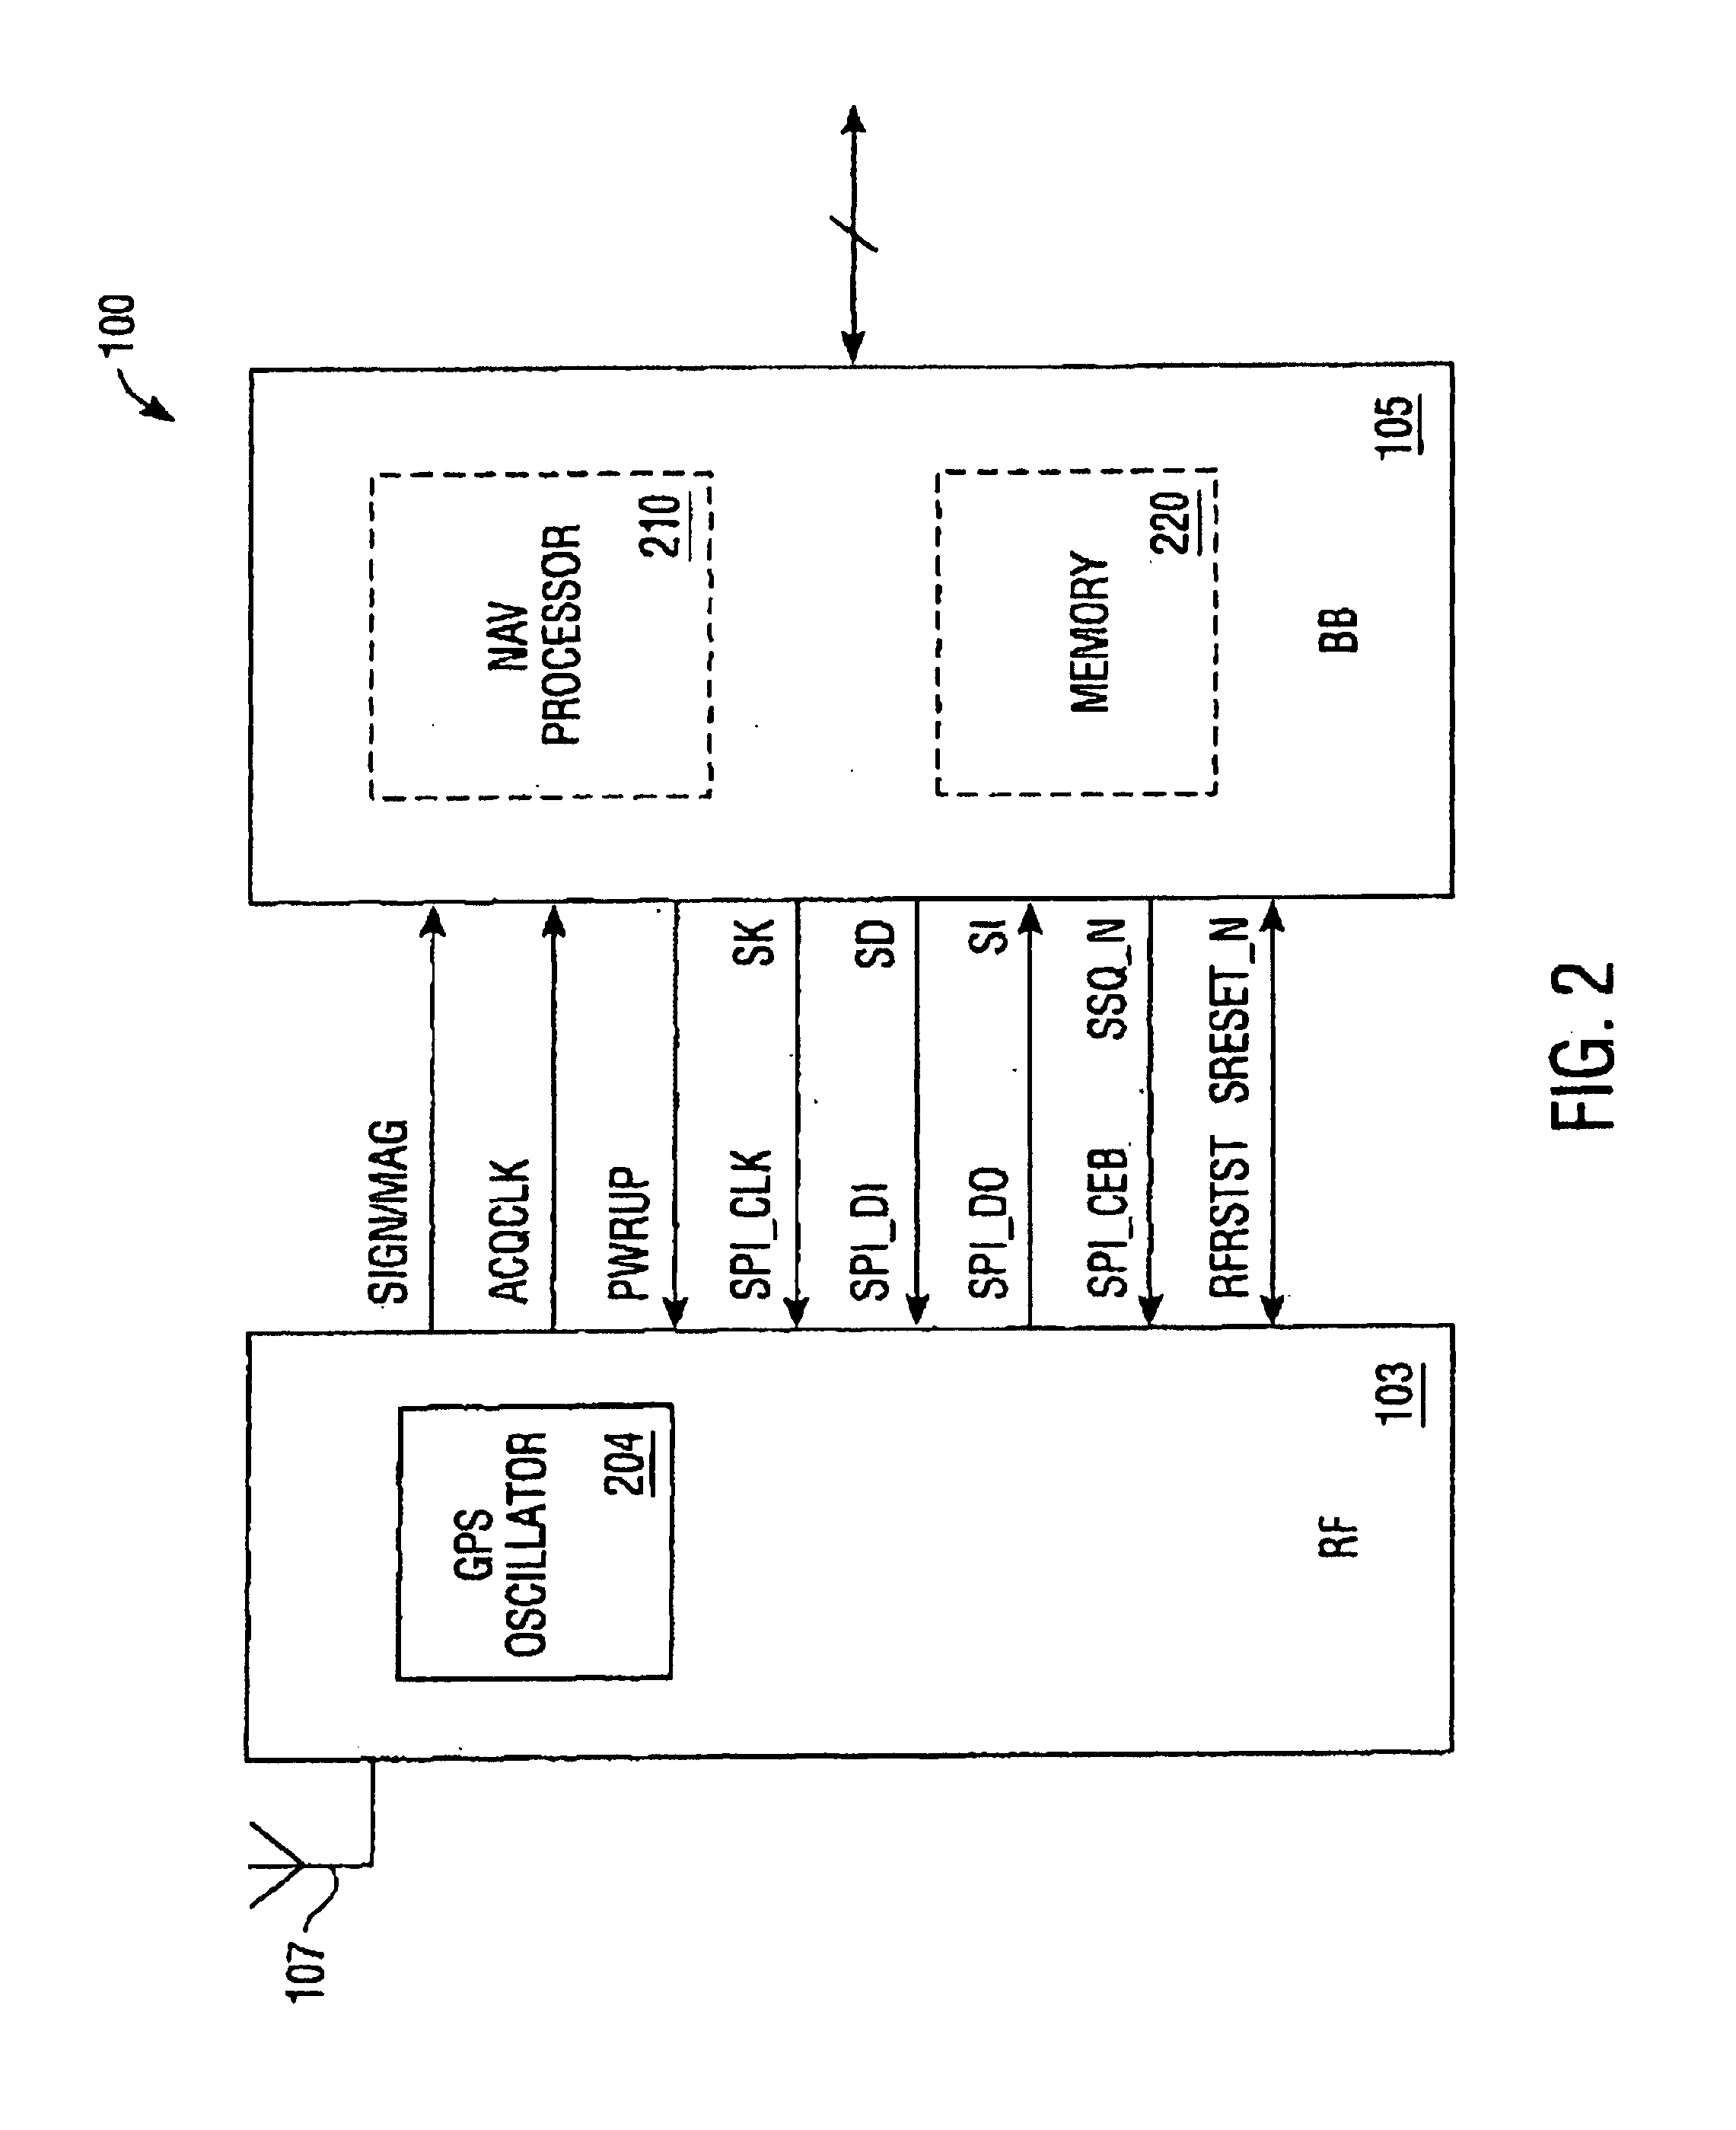 Method and apparatus for real time clock (RTC) brownout detection